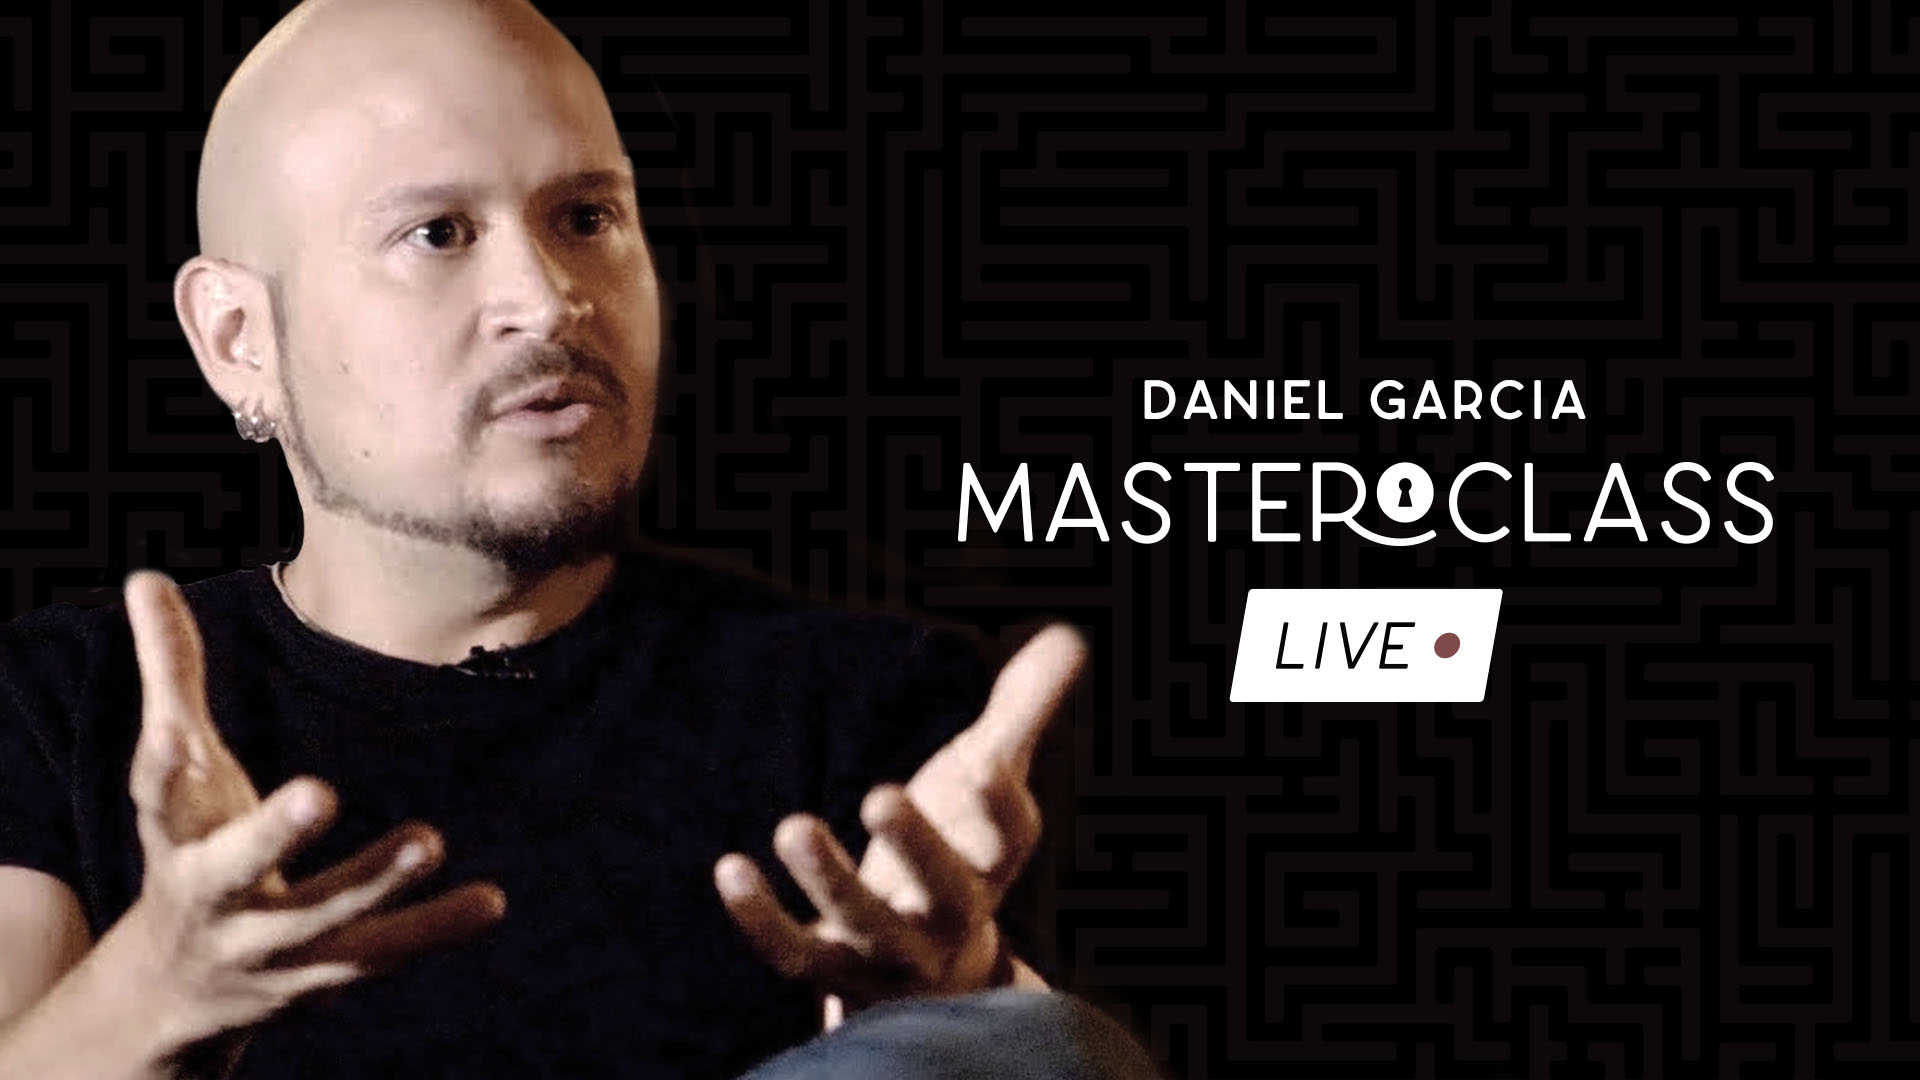 Danny Garcia - Masterclass Live Lecture (Week 1)